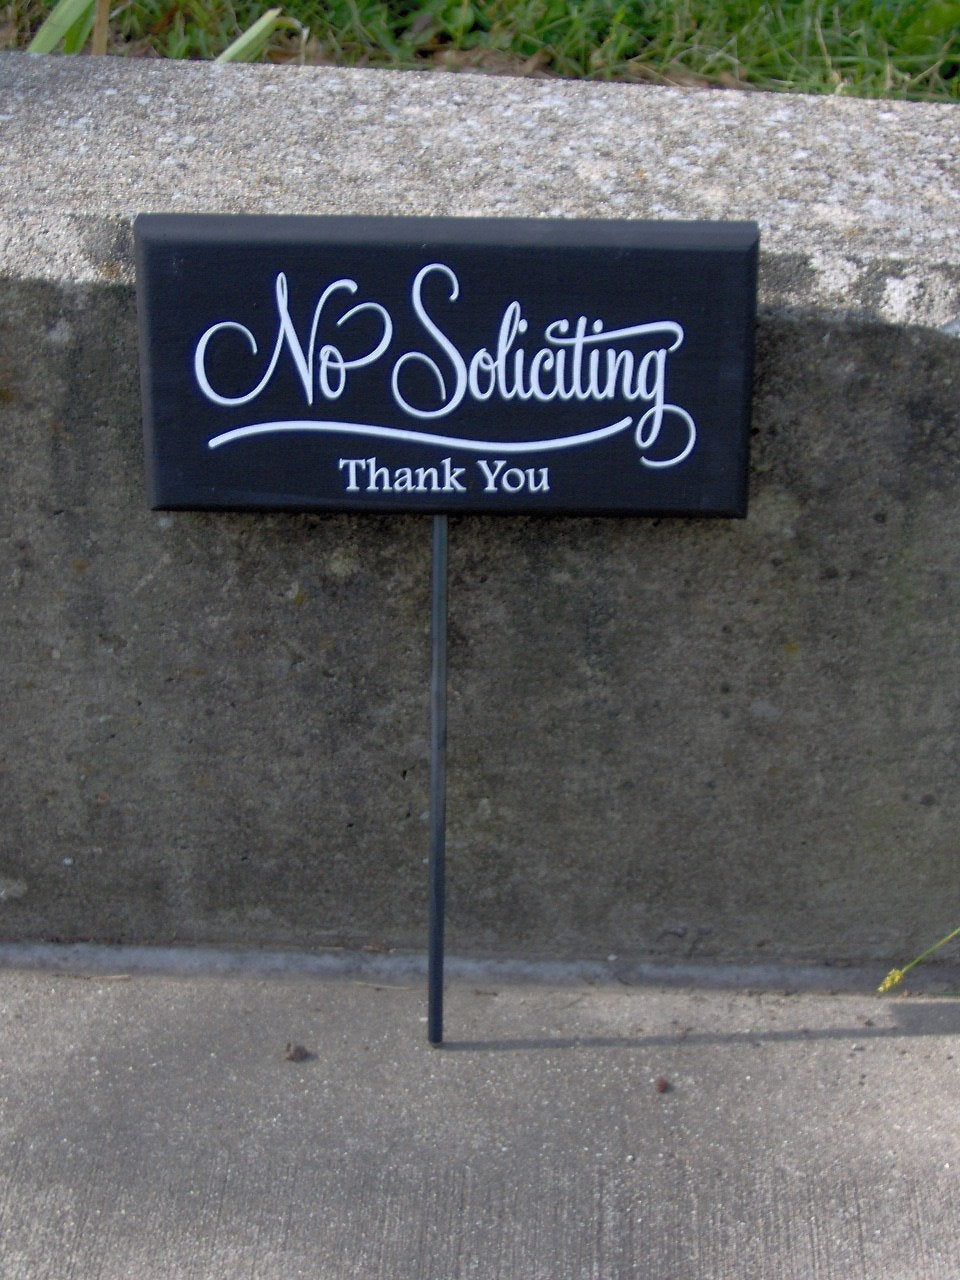 No Soliciting Thank You Wood Vinyl Stake Sign Retro Everyday Porch Home Decor Sign Garden Yard Sign Do Not Disturb Private Property Gift - Heartfelt Giver